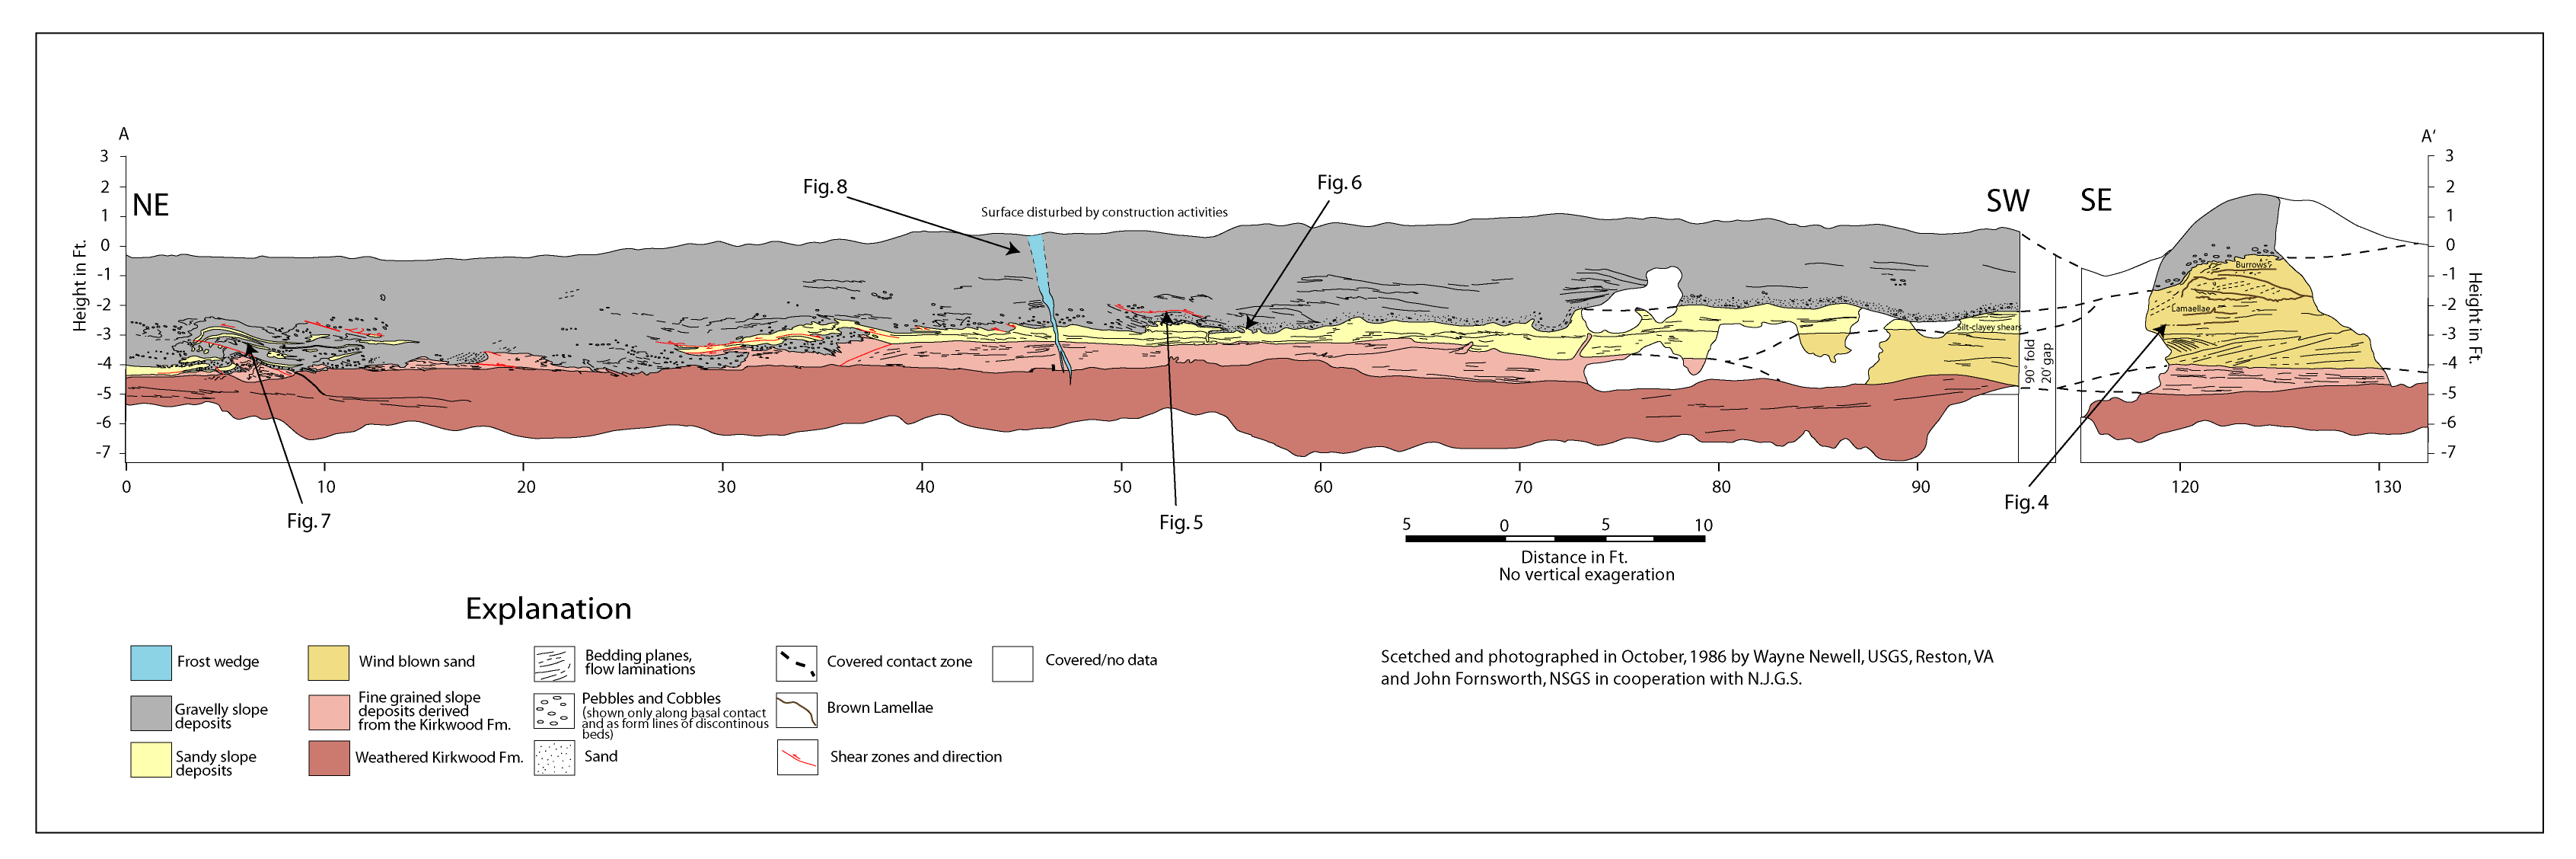 Figure 3--expanded. Profile of an Excavated High wall (1986) at a Building Site at Haines Corner Near Hutton Hill, Camden County, New Jersey.